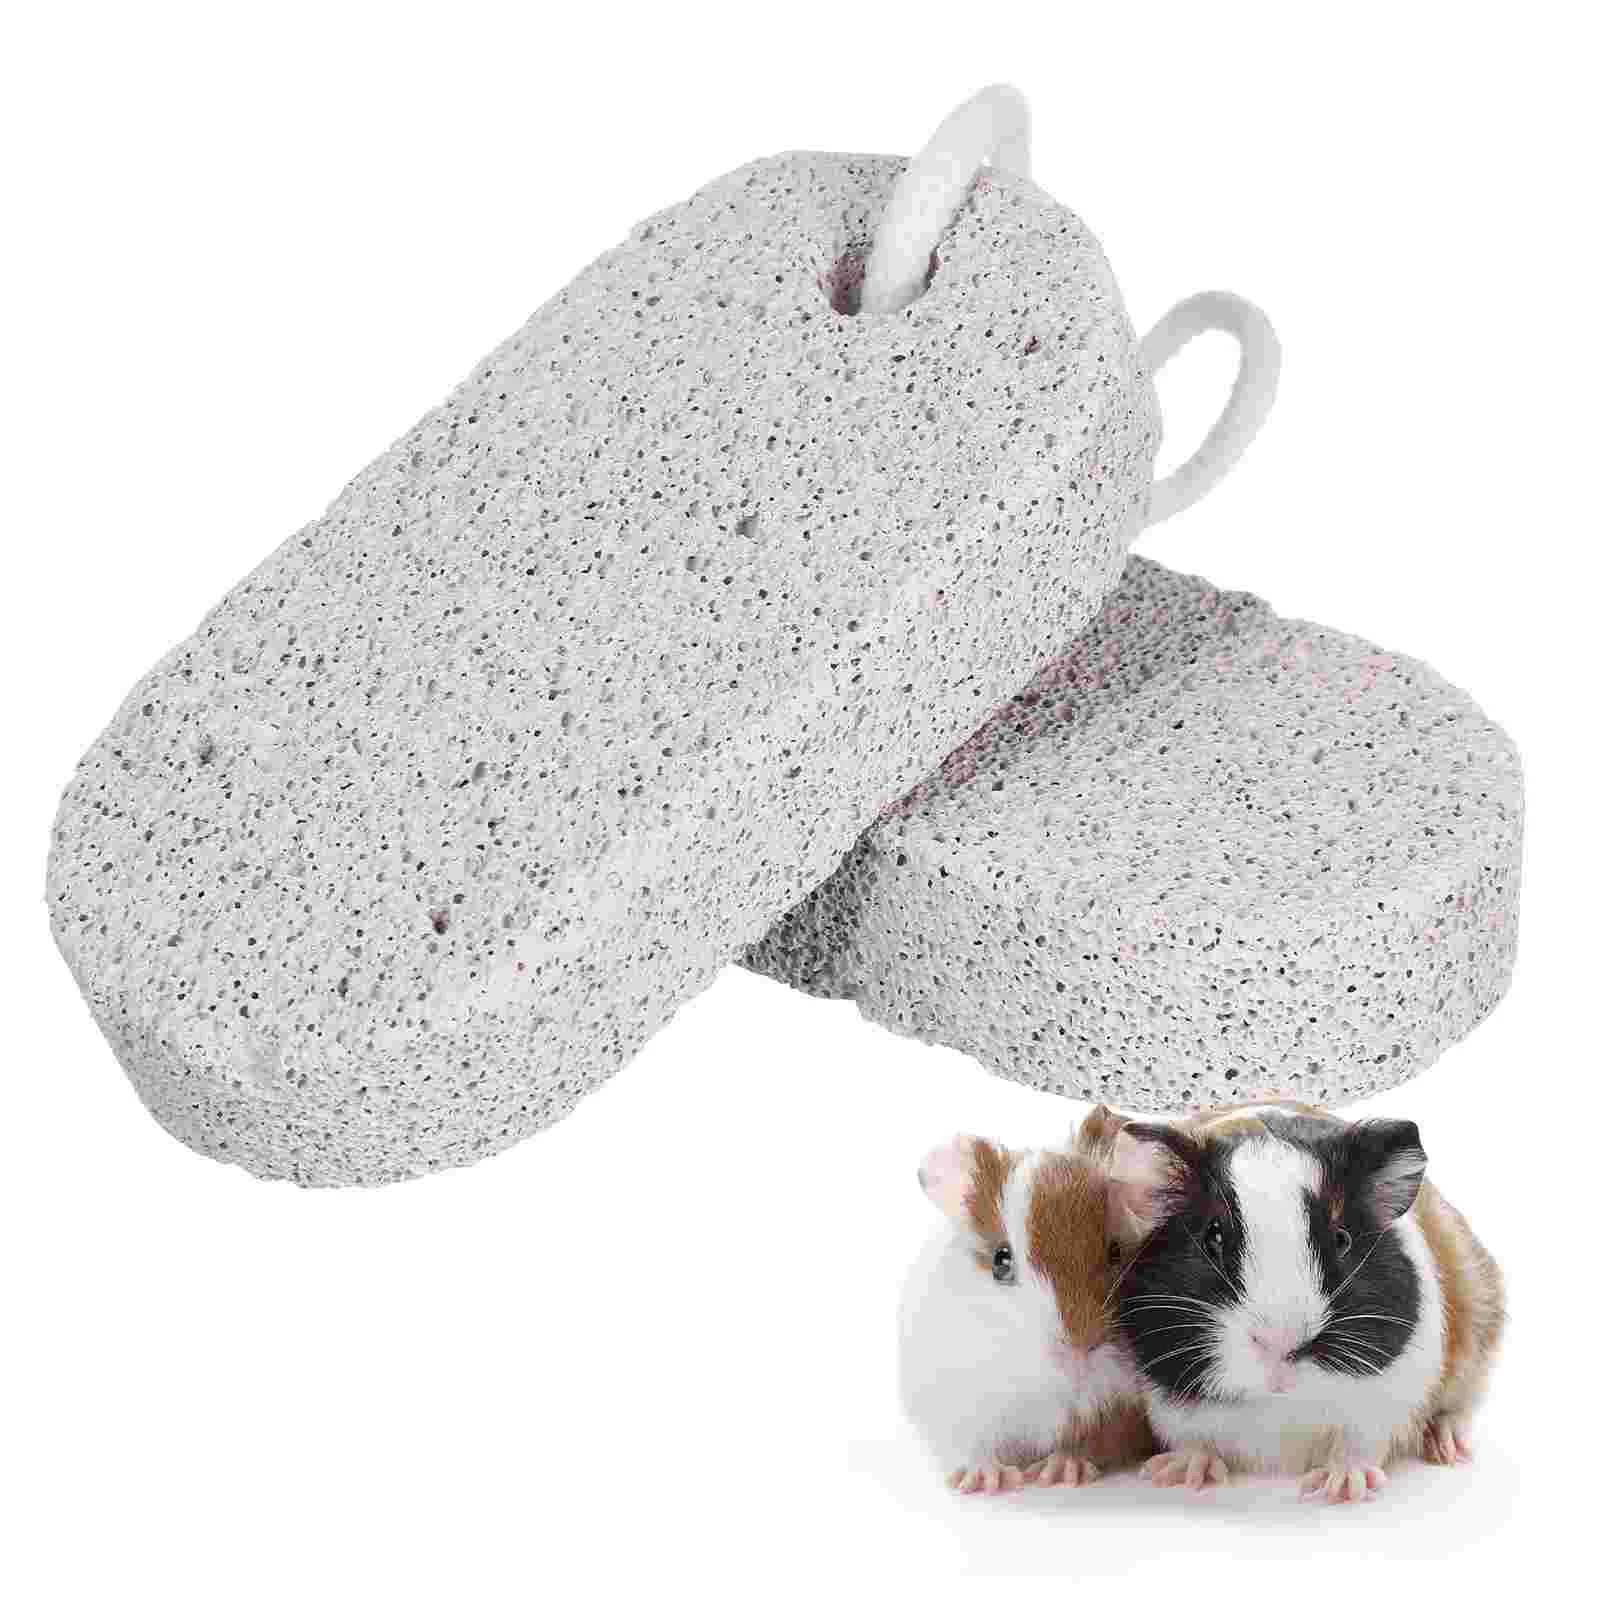 

2 Hamster Chew Grinding Stone Block Small Chew Treat Toys for Parrot Chinchilla Guinea